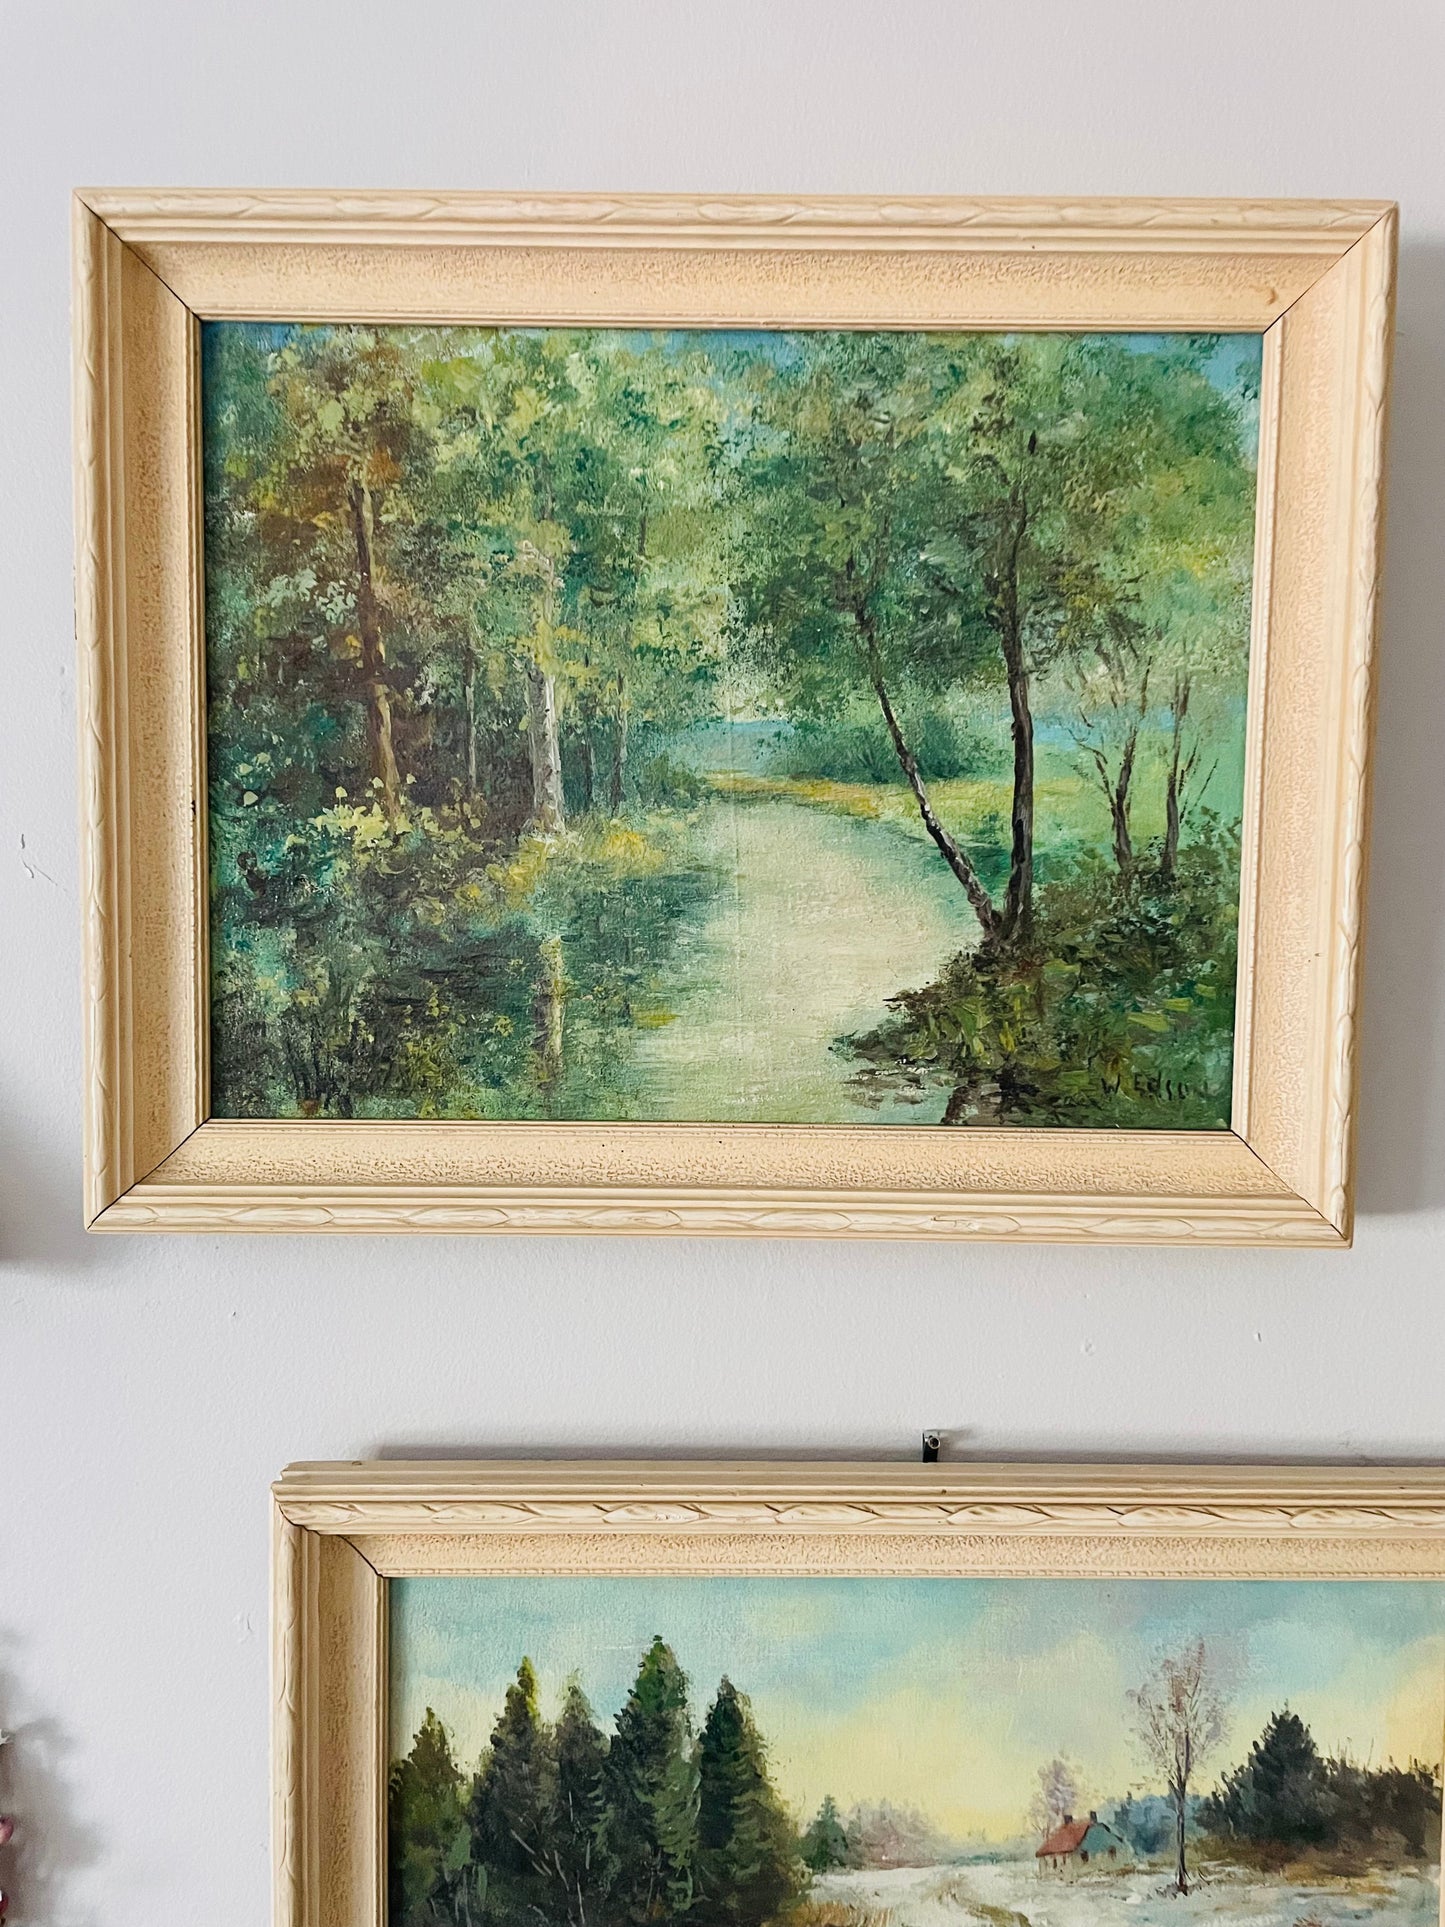 Original Art Painting in White Wood Frame - Signed by Artist - River Through Forest Scene